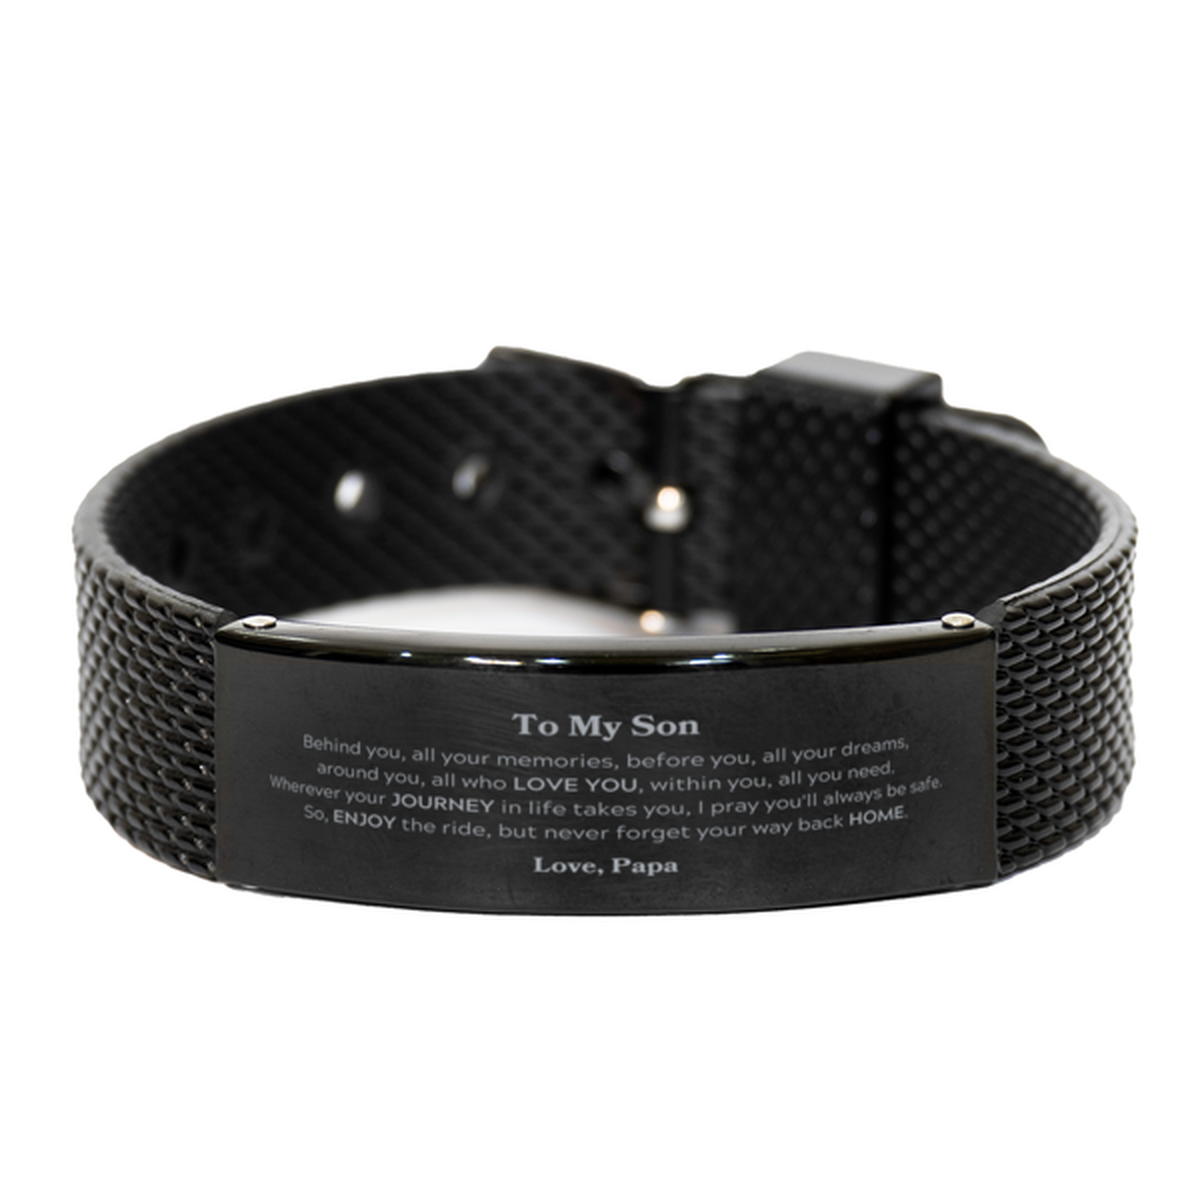 To My Son Graduation Gifts from Papa, Son Black Shark Mesh Bracelet Christmas Birthday Gifts for Son Behind you, all your memories, before you, all your dreams. Love, Papa